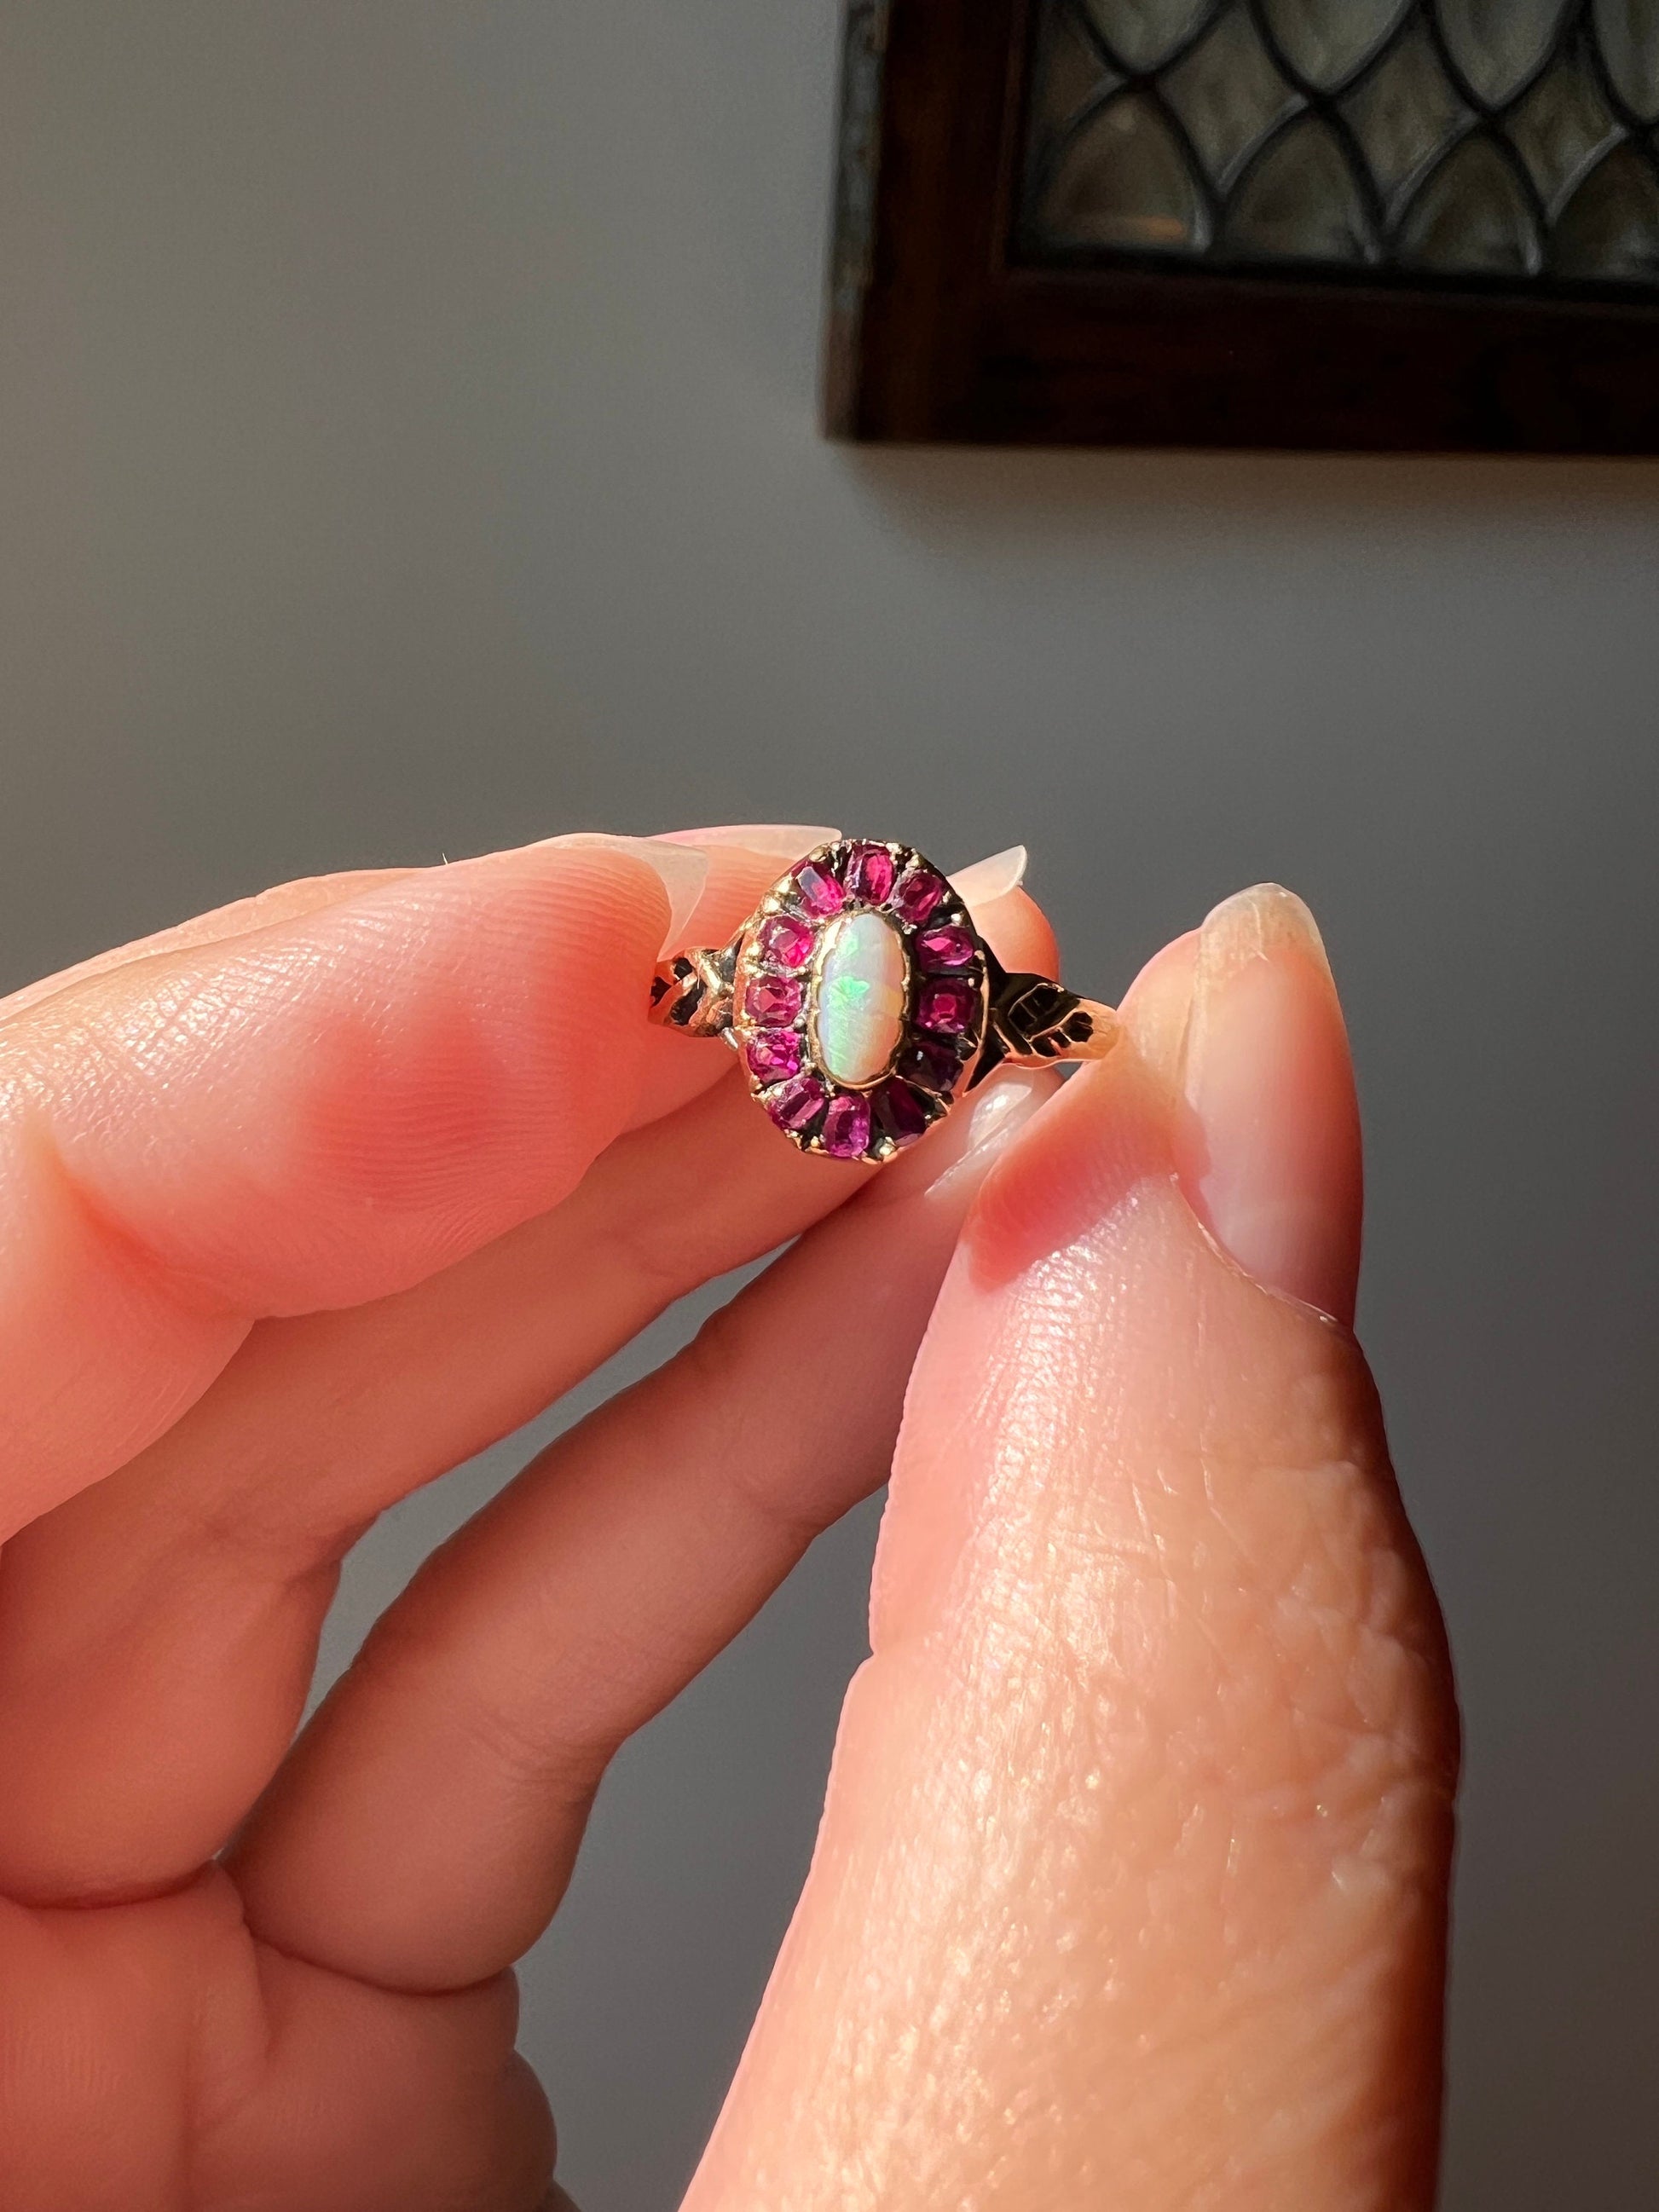 Dainty French Victorian 18k Gold Old Cut RUBY Halo OPAL Ring Antique Braided Shoulders Belle Epoque Art Nouveau Romantic Gift Stacker Pink